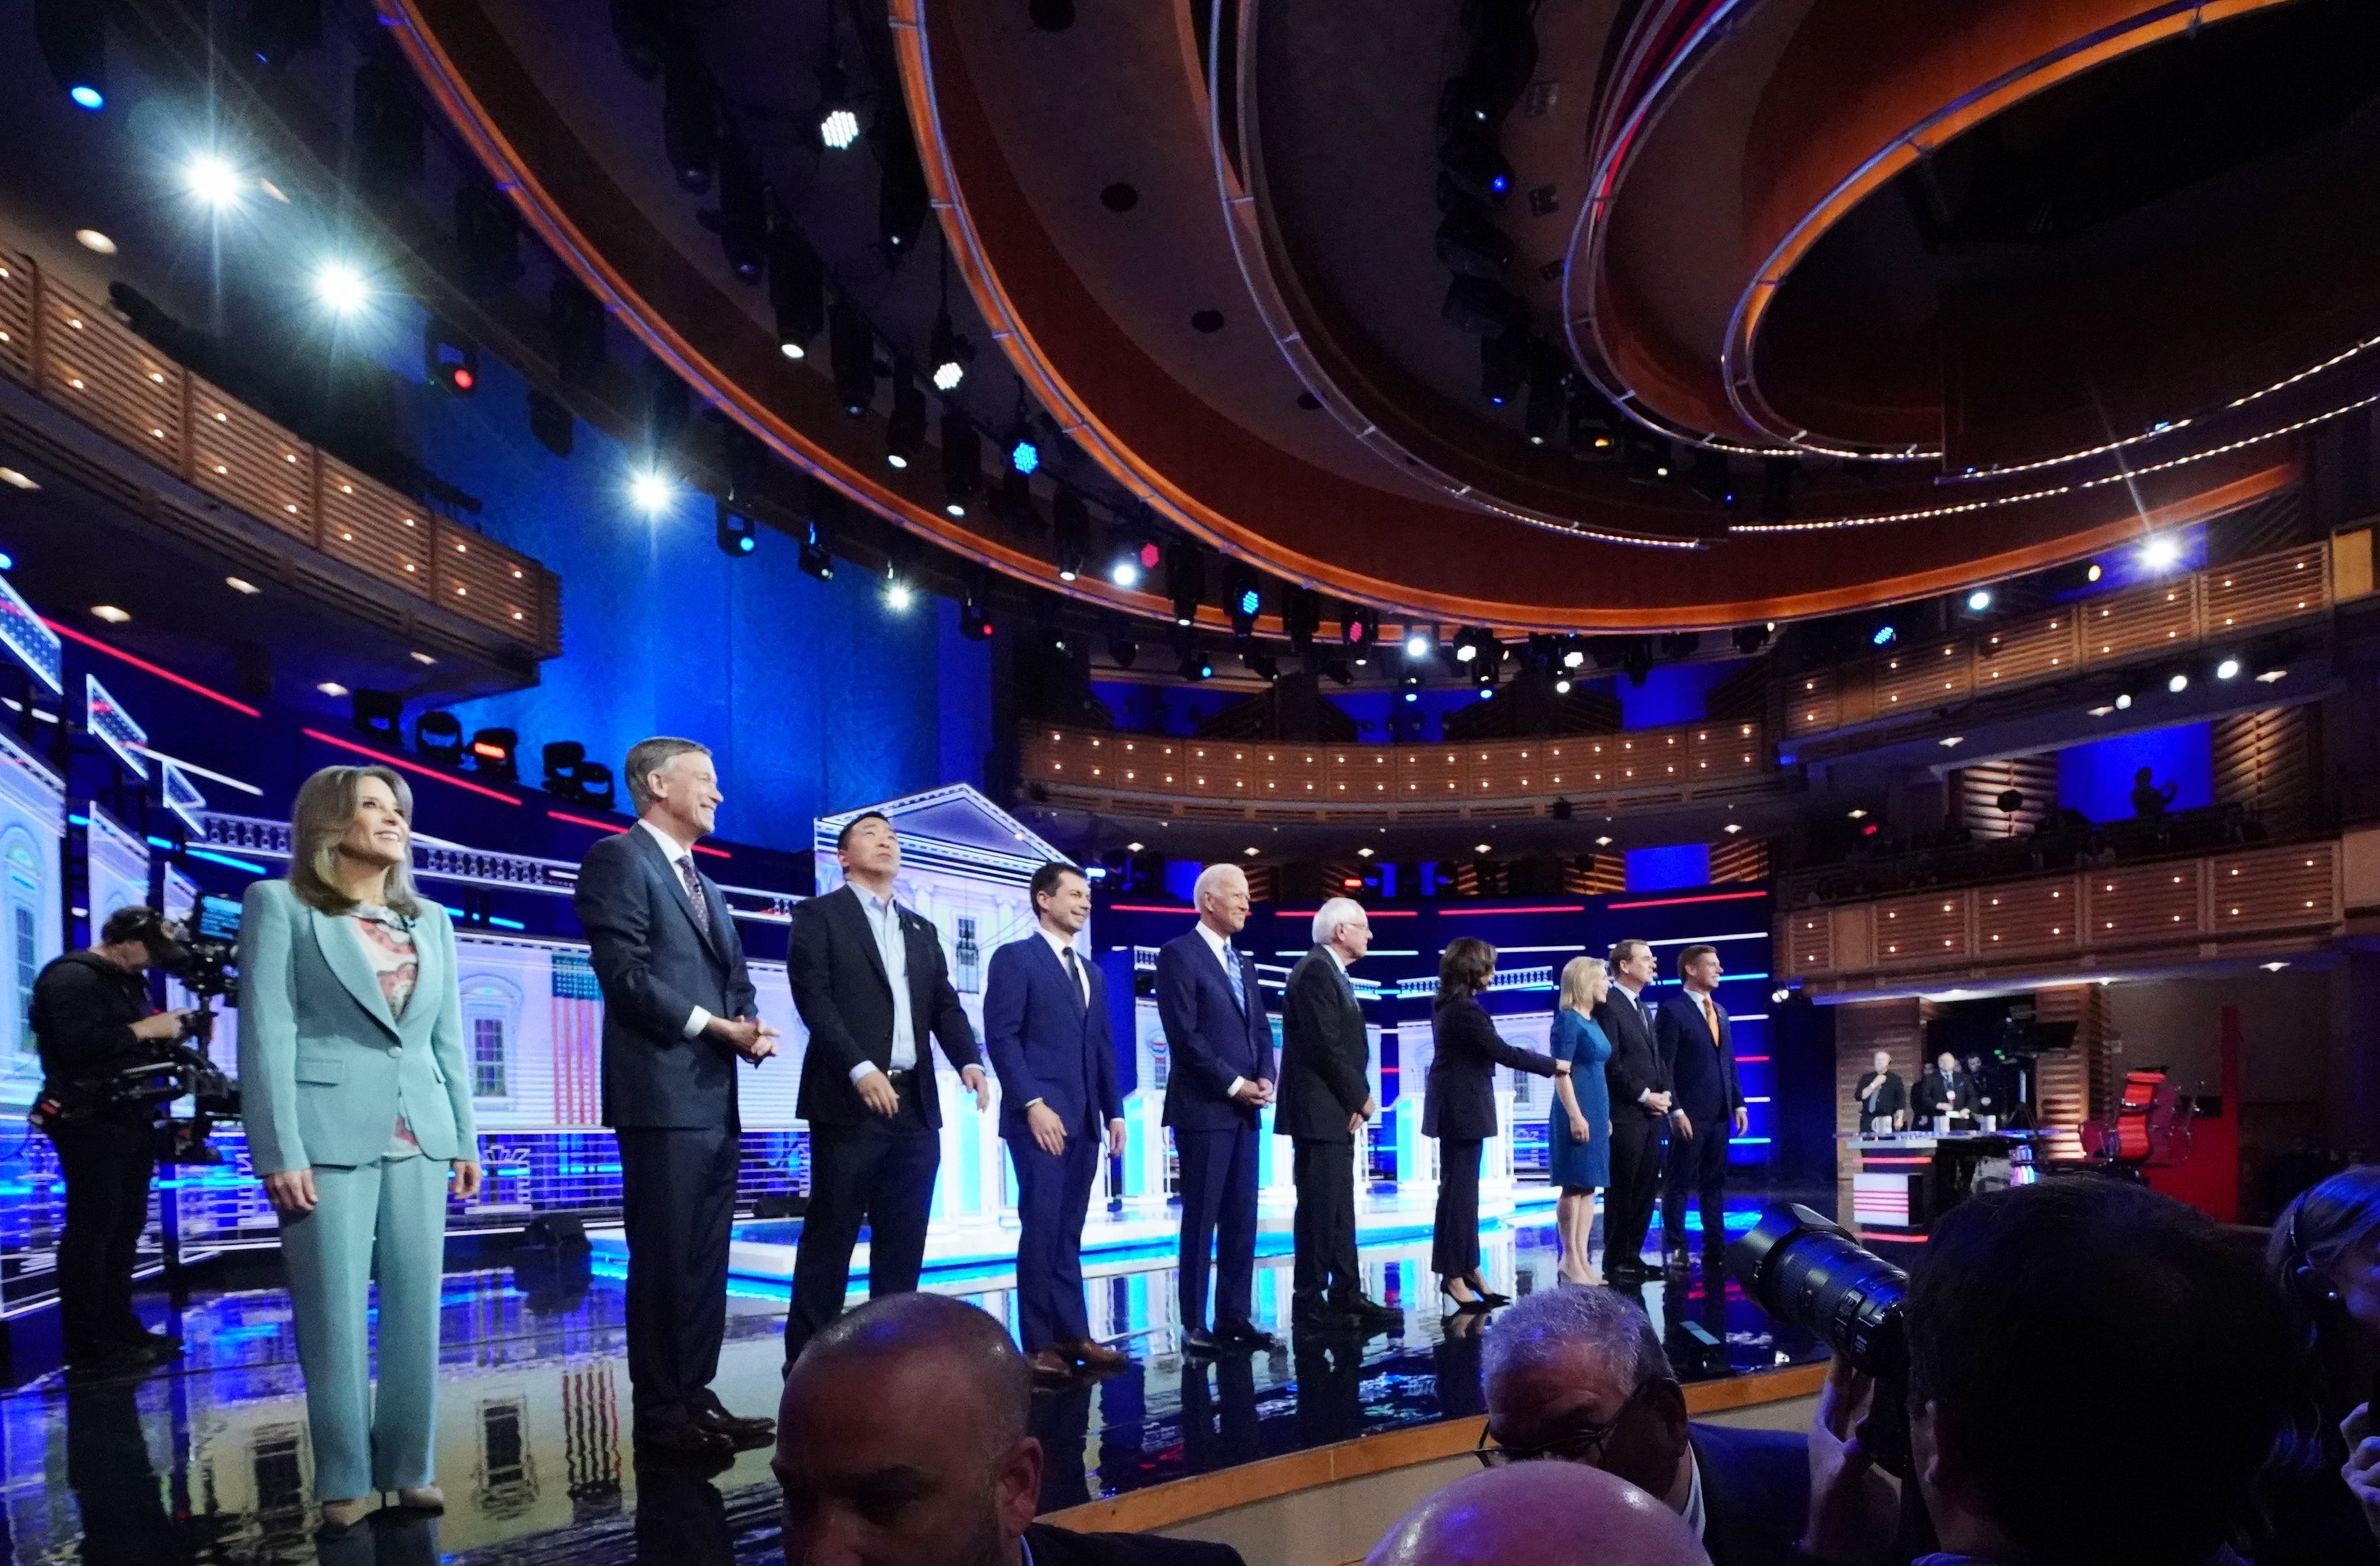 Candidates pose before the start of the second night of the first U.S. 2020 presidential election Democratic candidates debate in Miami, Florida, U.S.